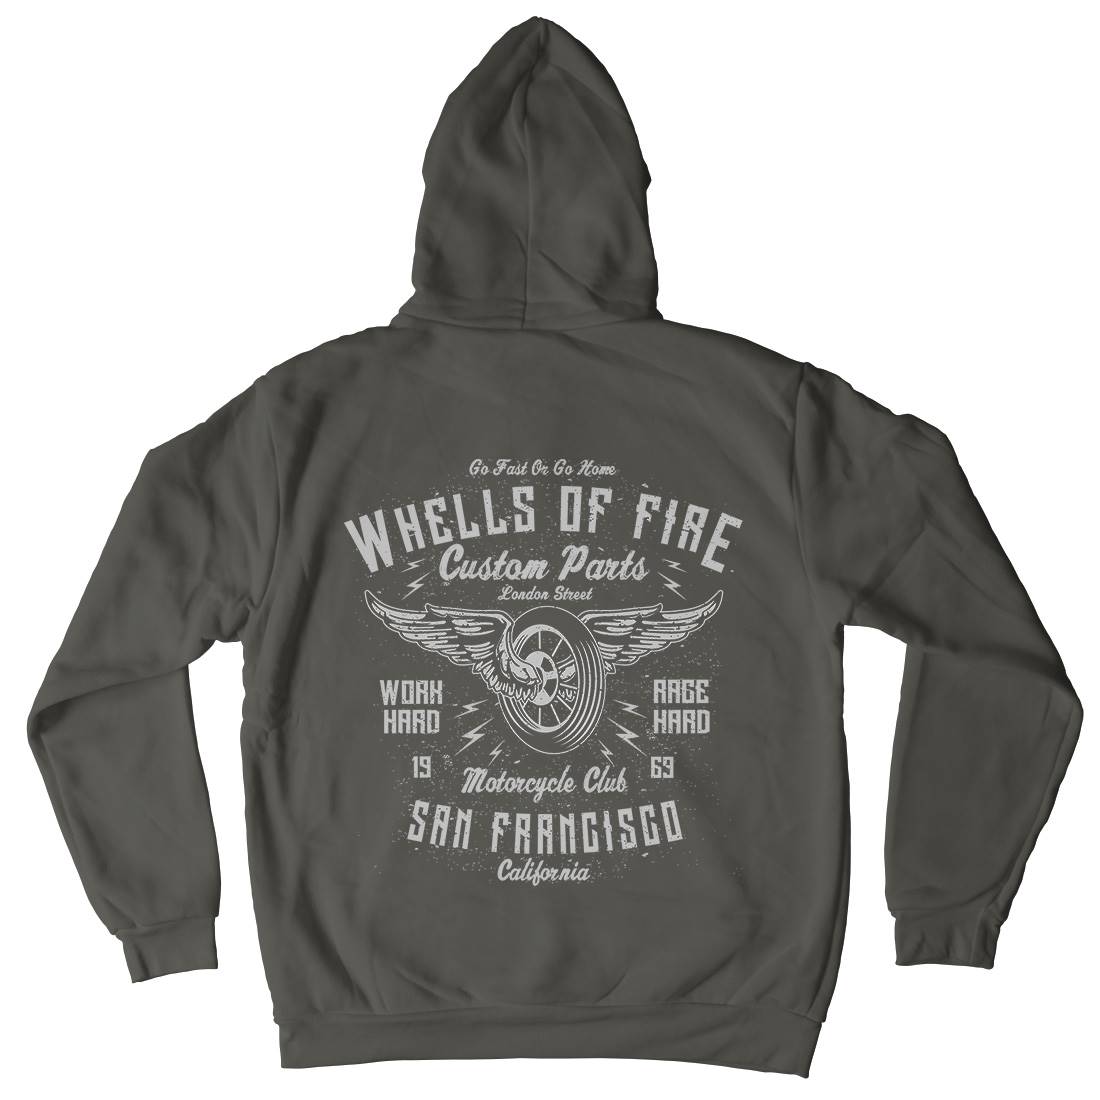 Wheels Of Fire Mens Hoodie With Pocket Motorcycles A196